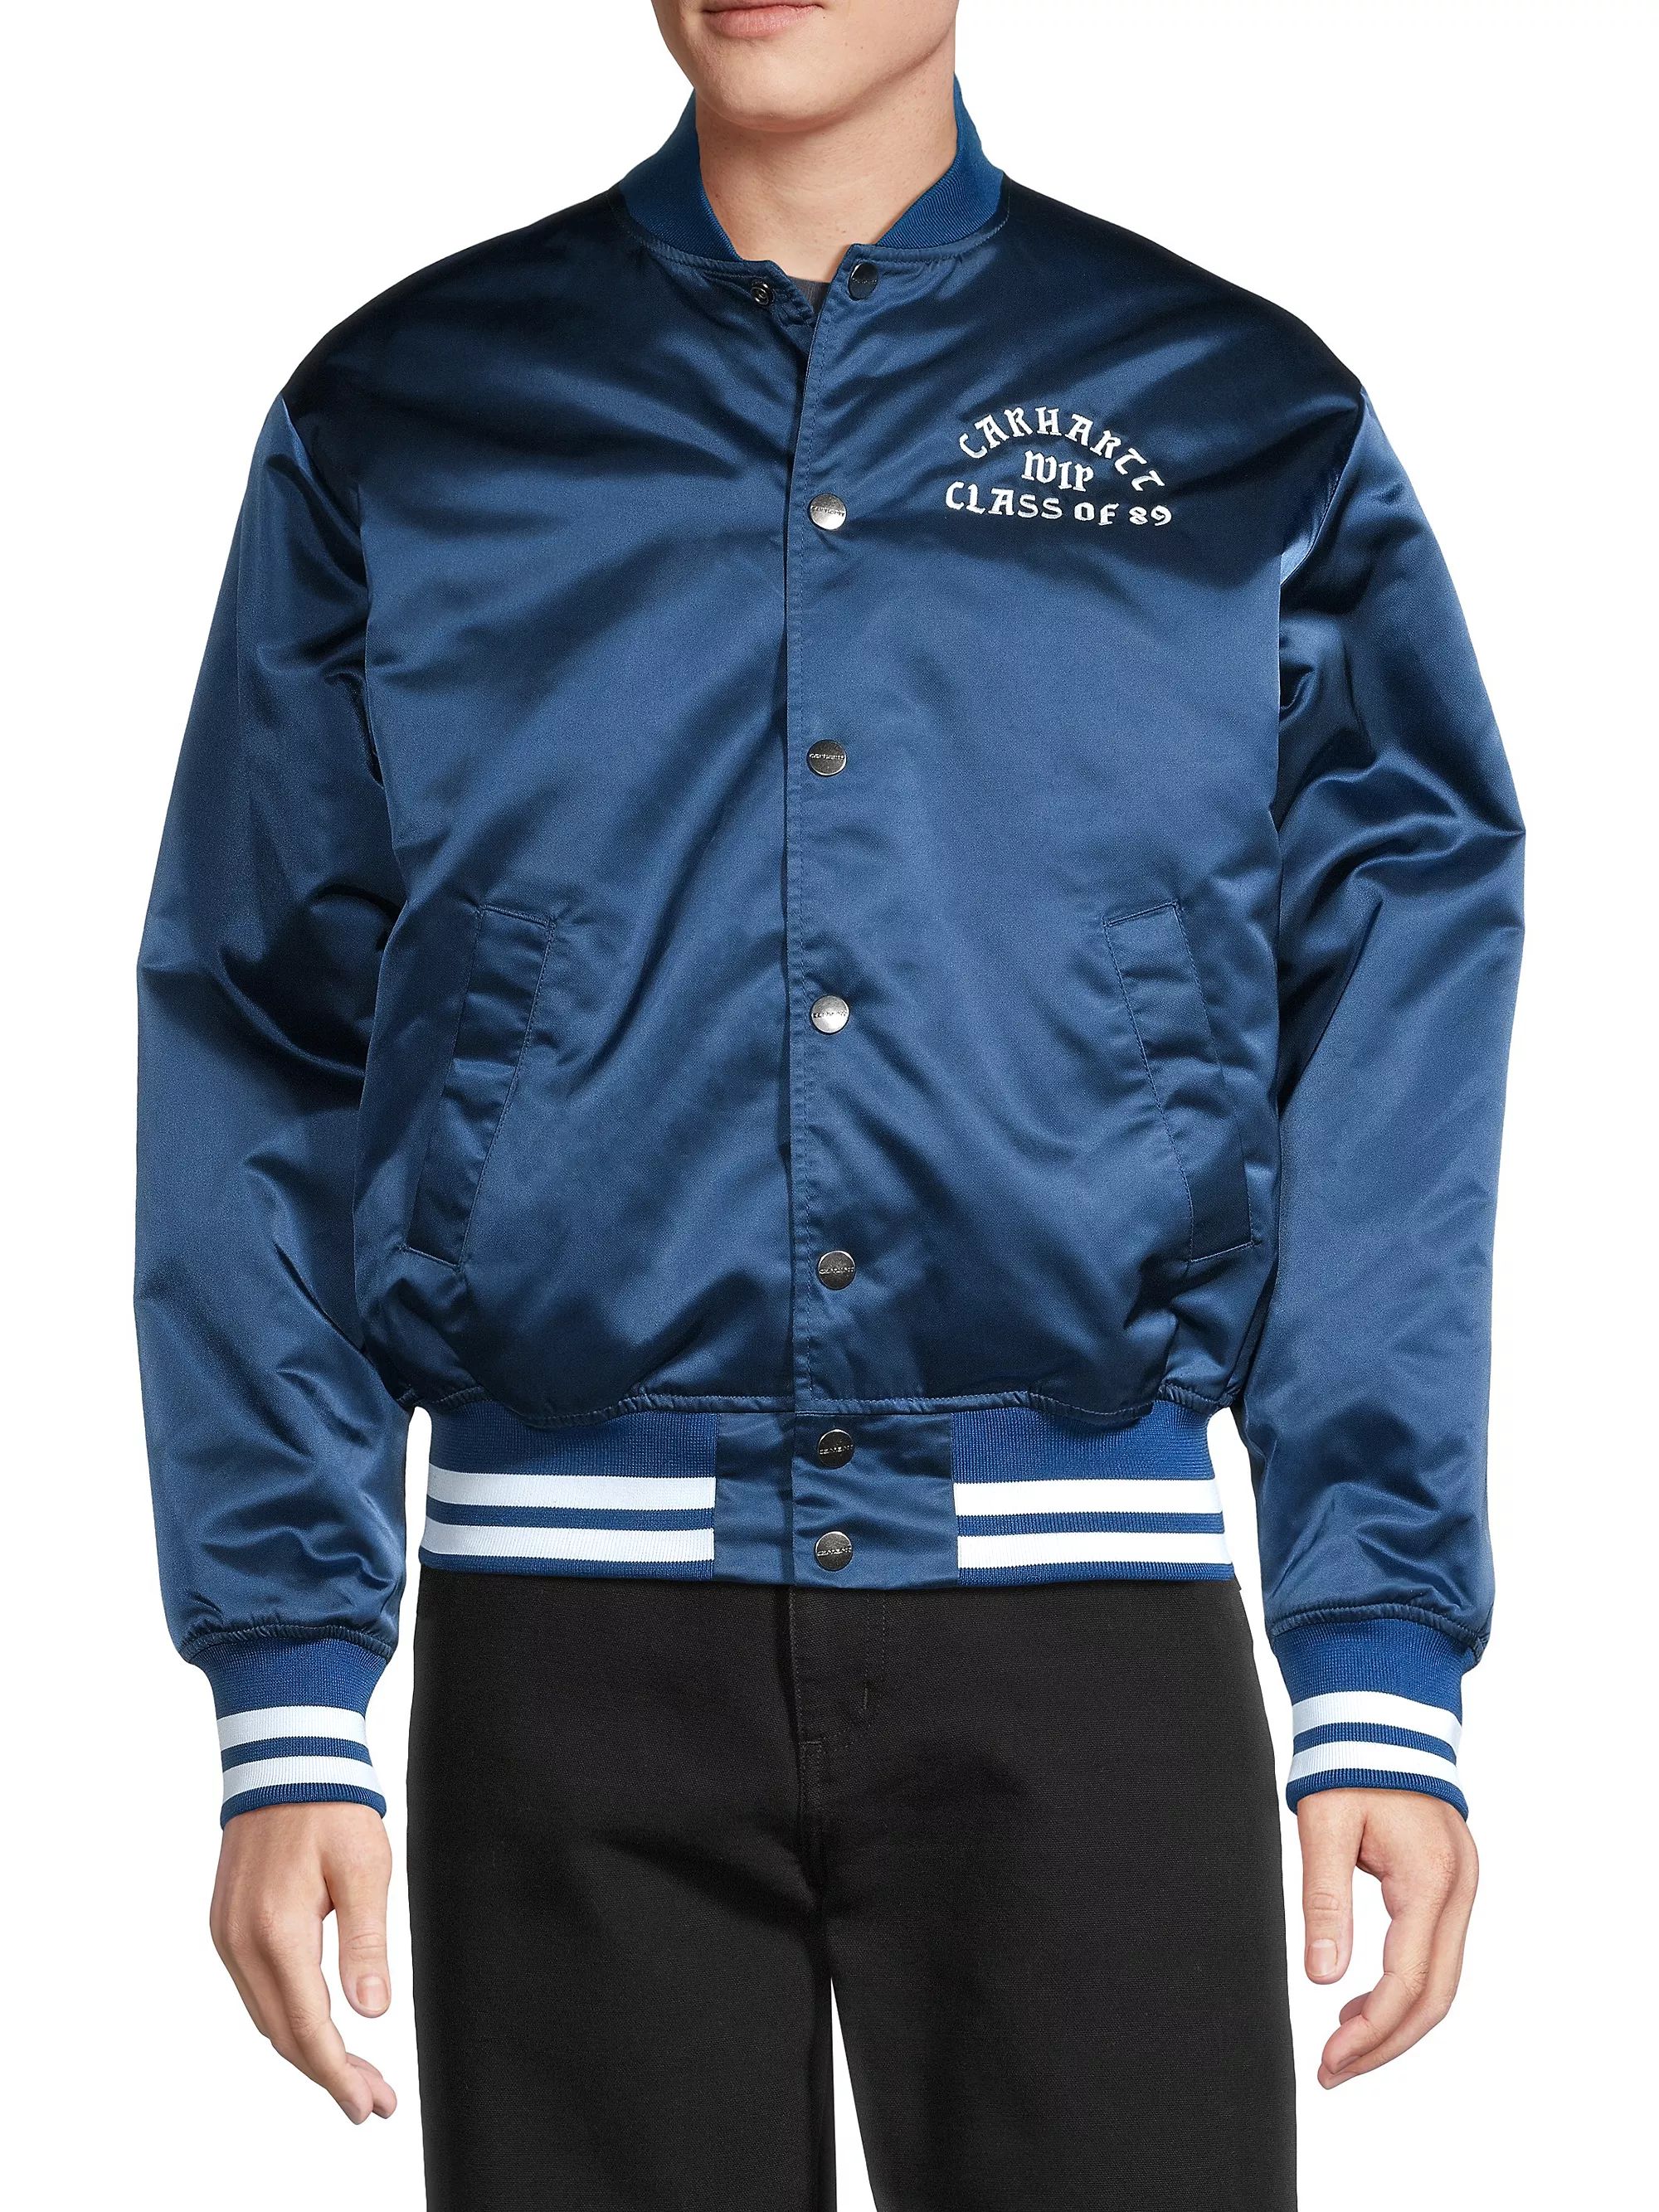 Class of '89 Bomber Jacket | Saks Fifth Avenue